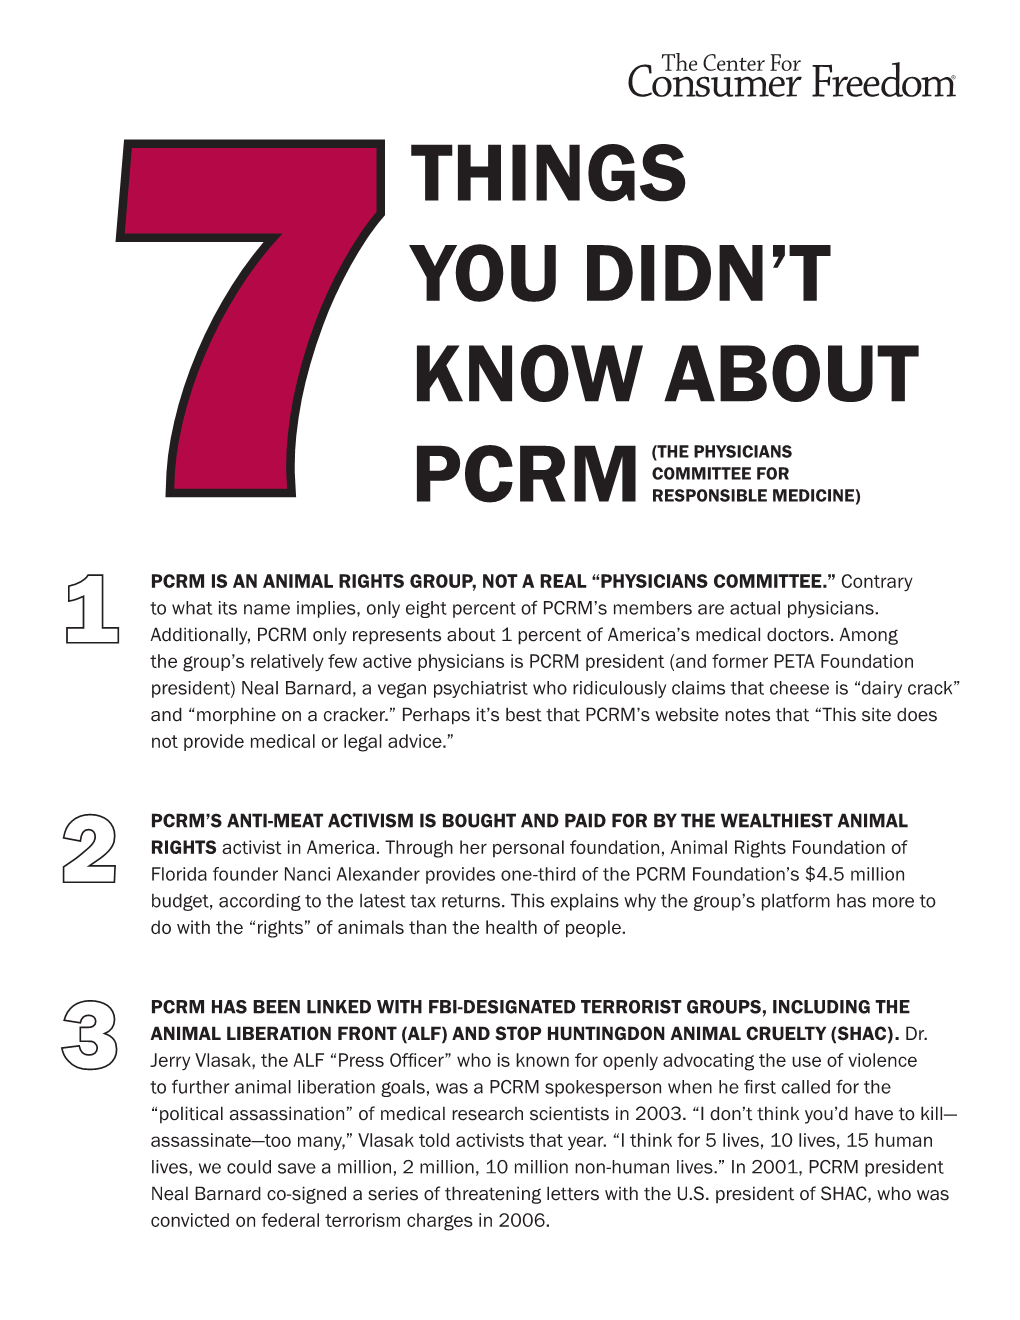 Things You Didn't Know About Pcrm